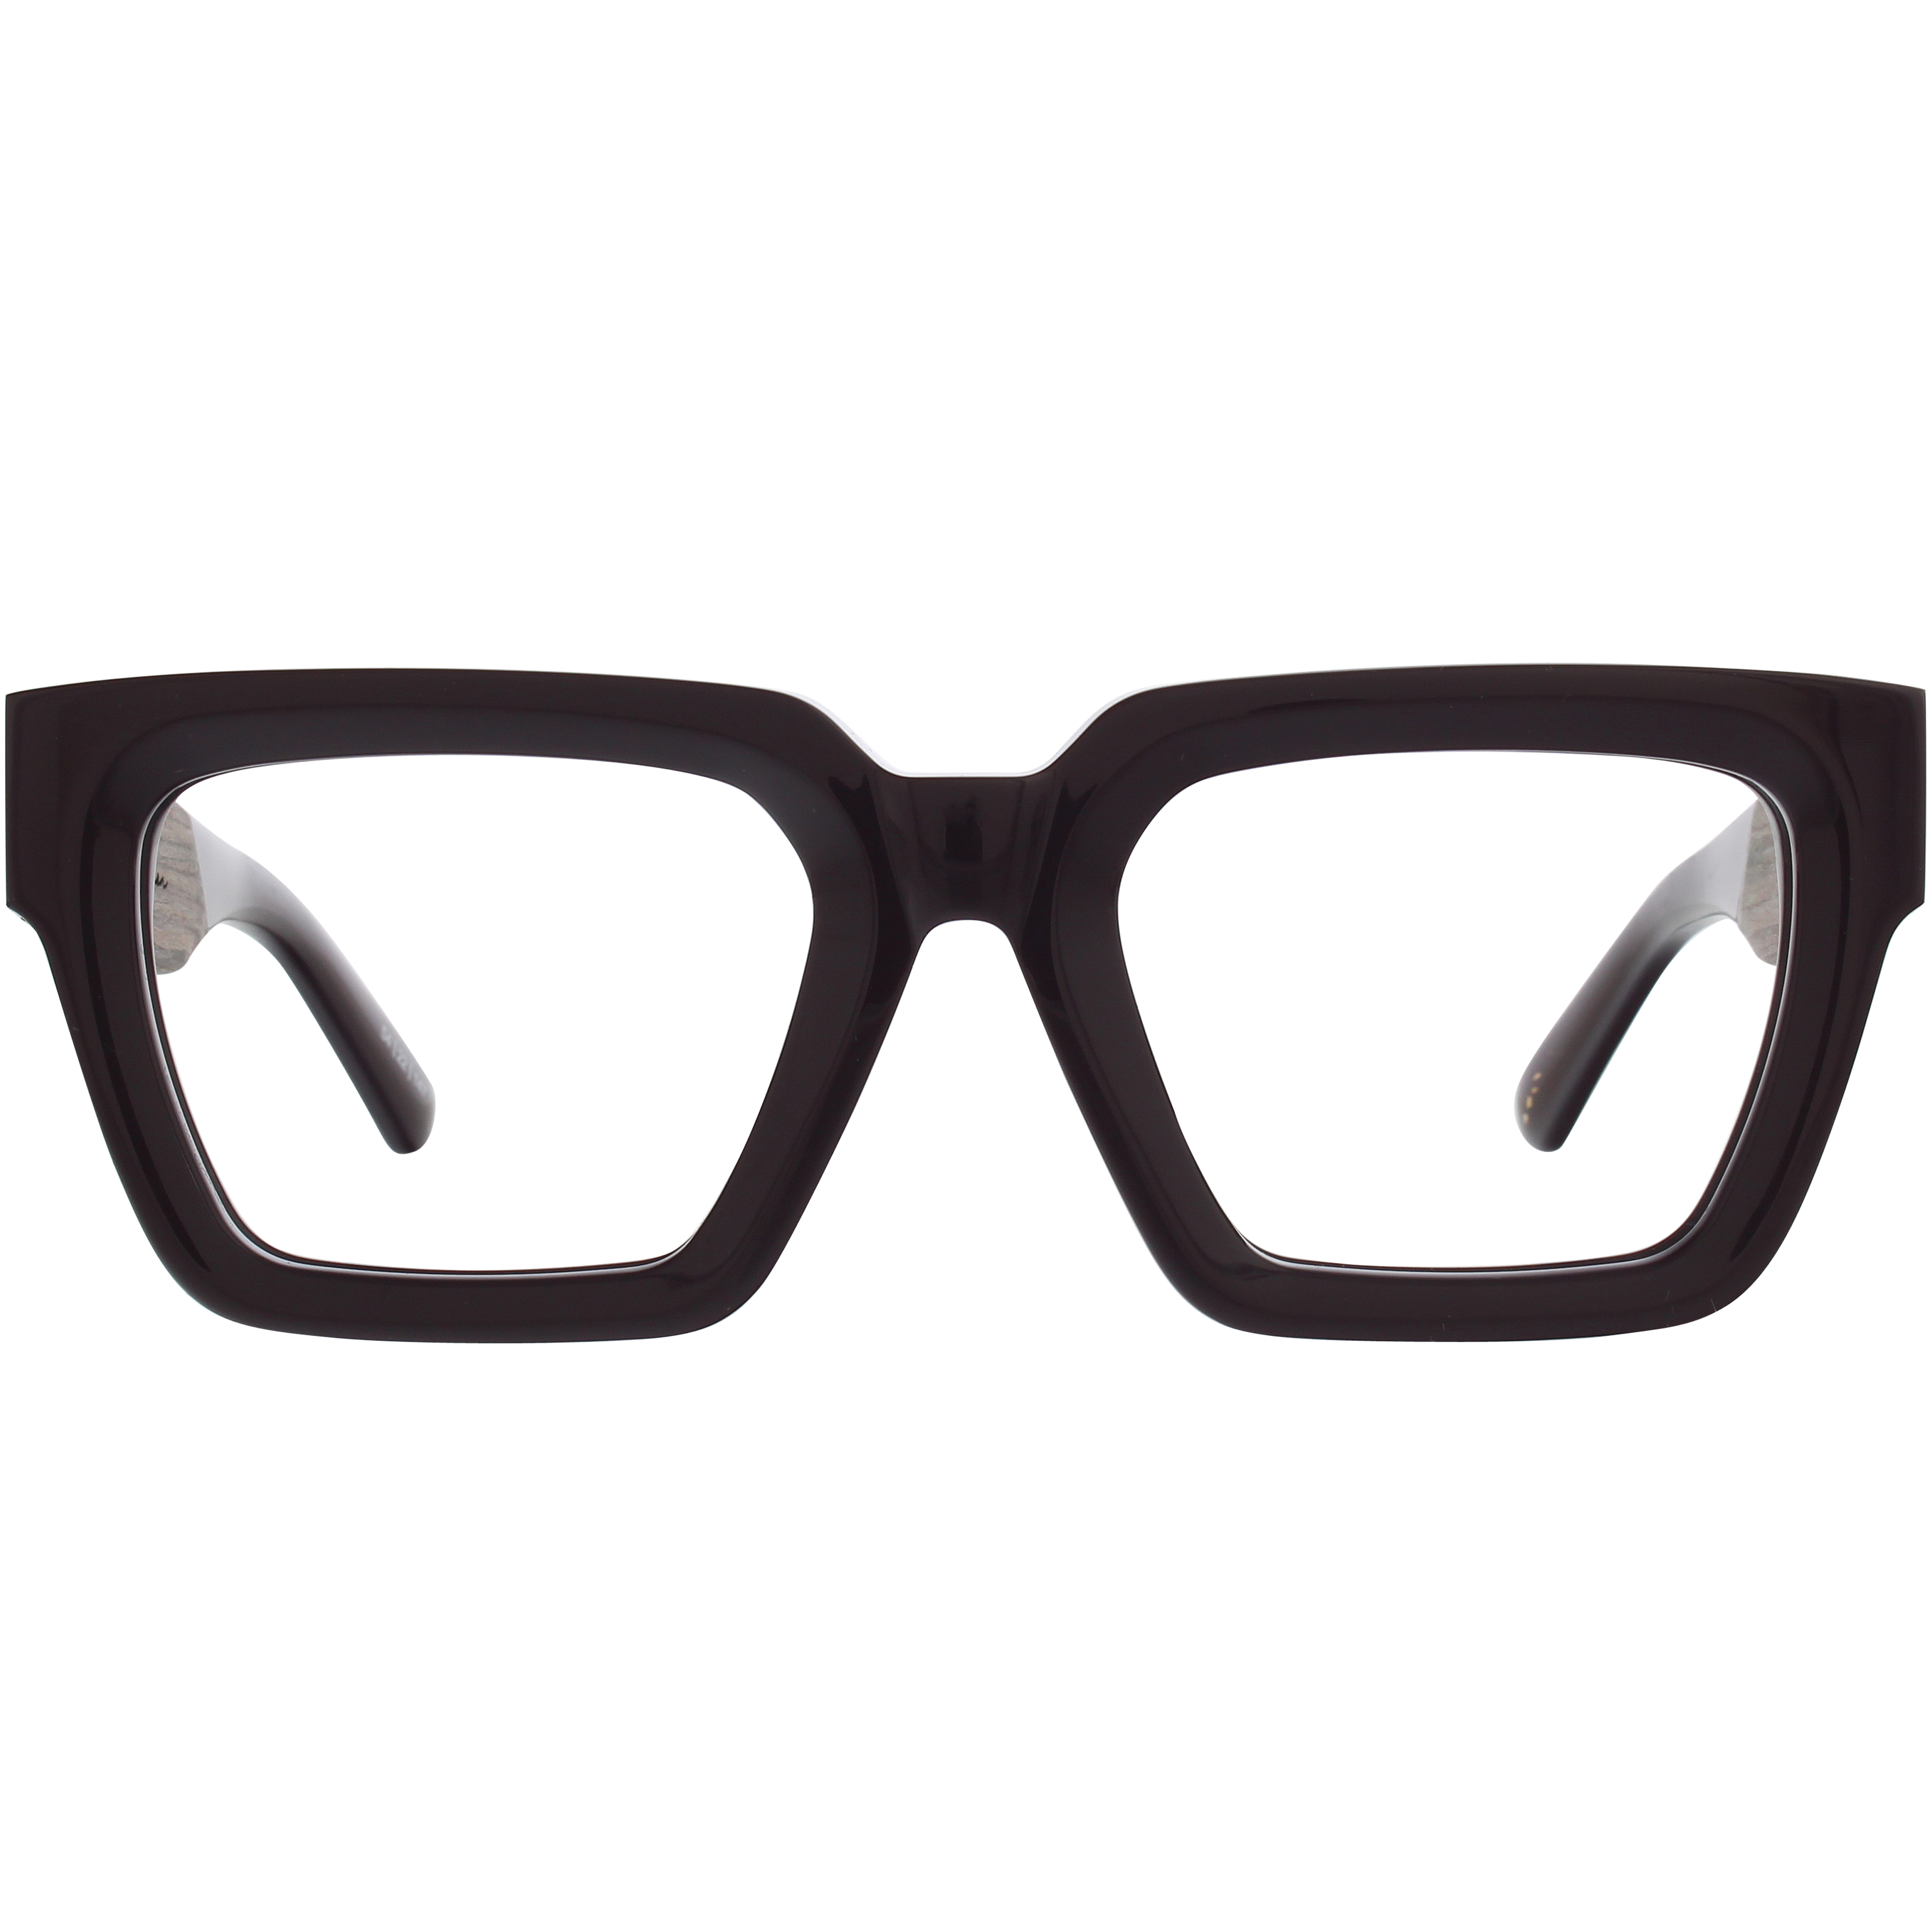 Fame Eyeglasses by Johnny Fly | 